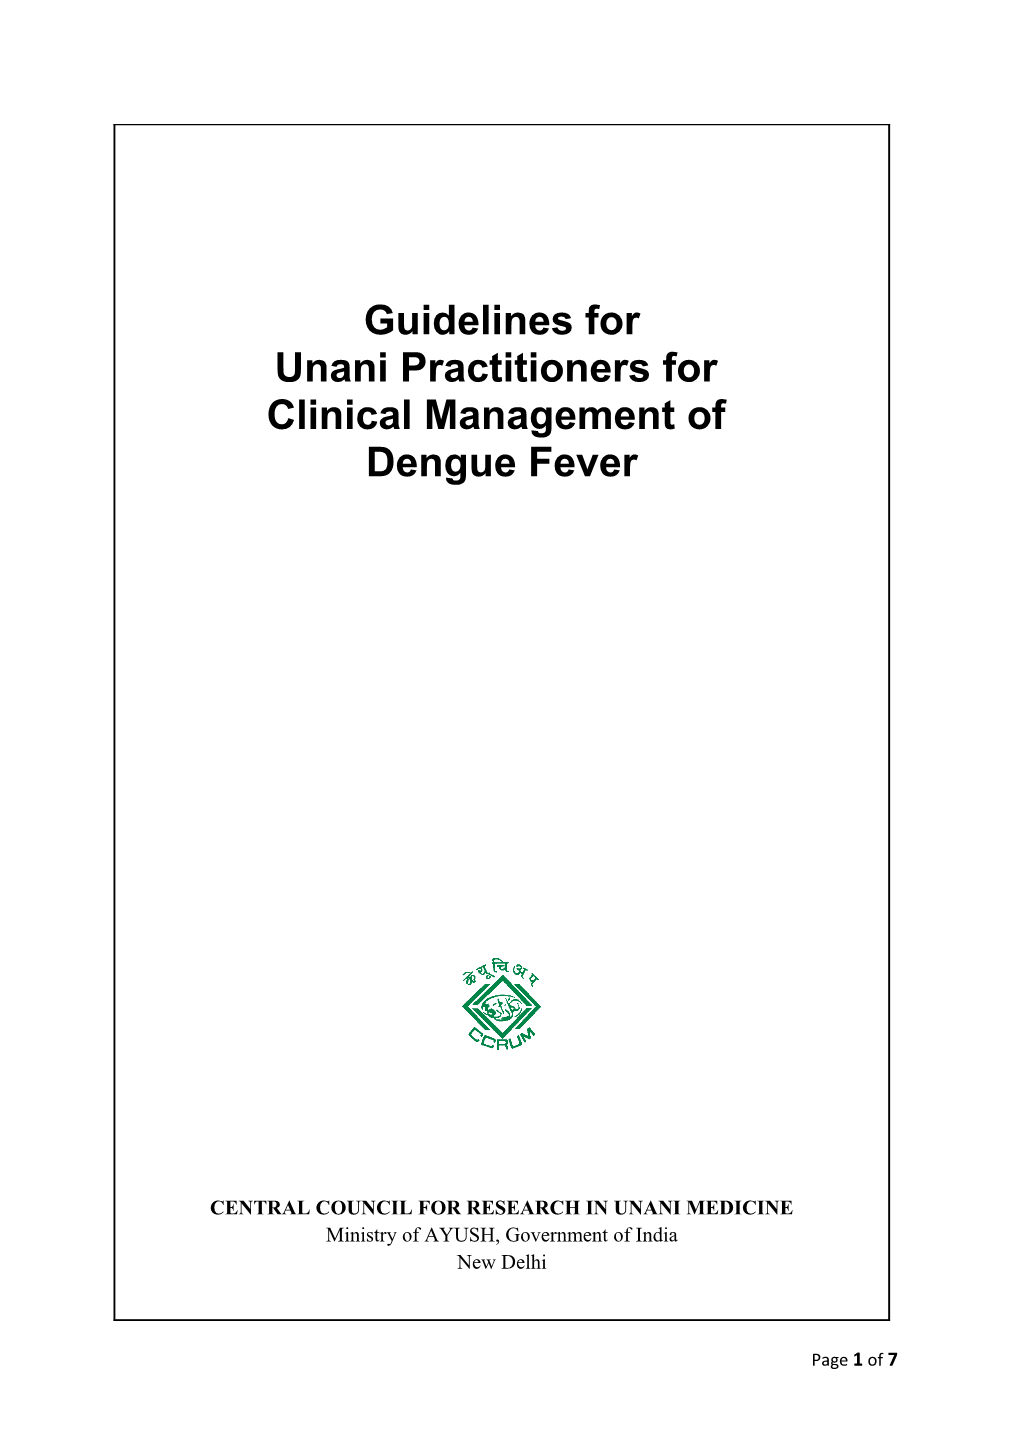 Guidelines for Unani Practitioners for Clinical Management Of